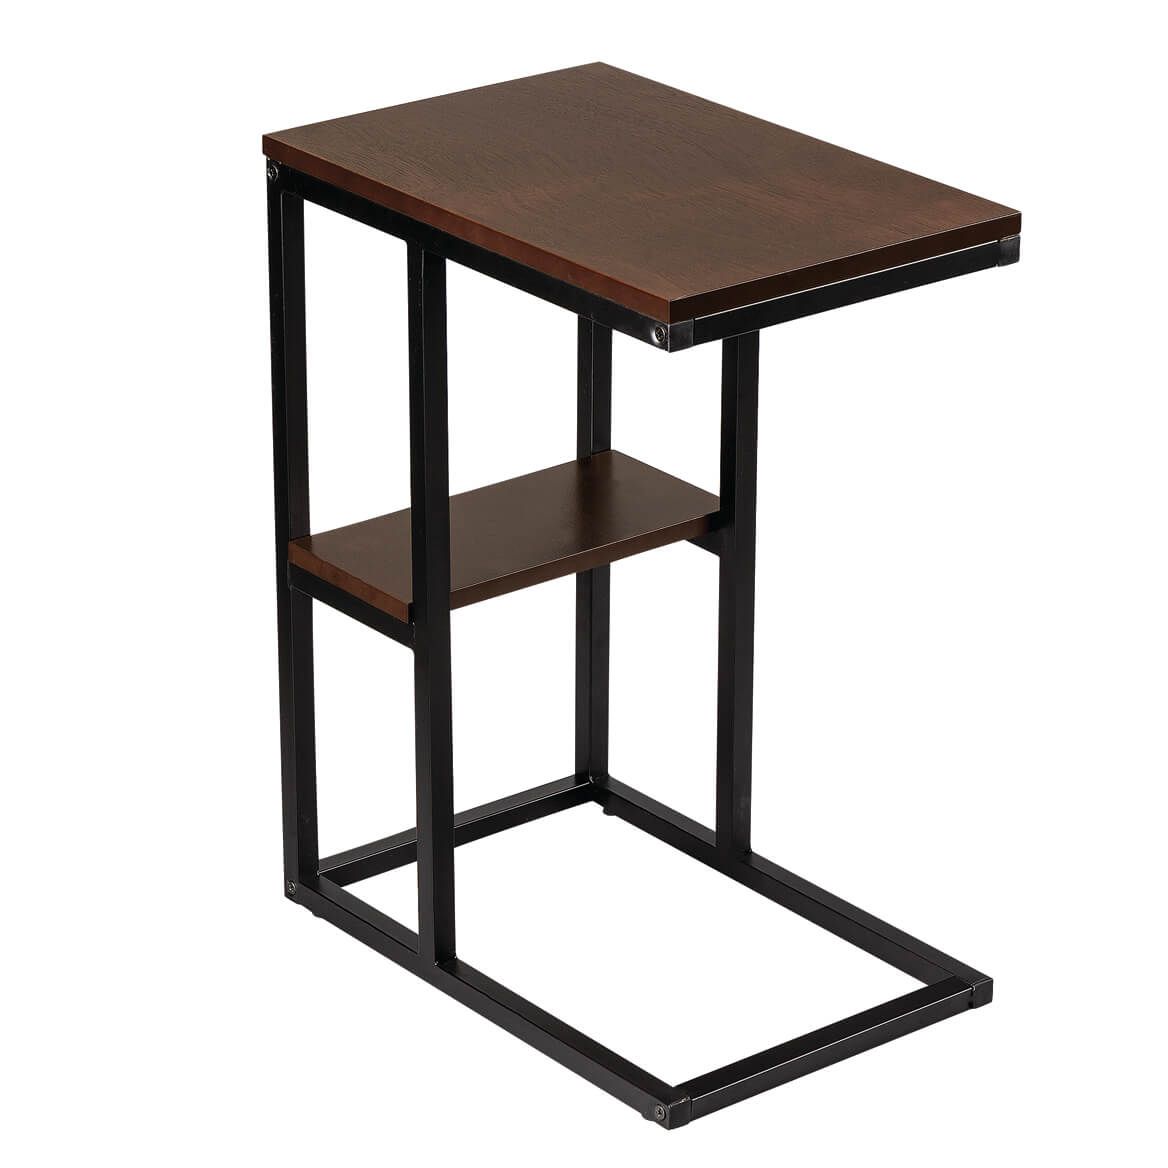 Side Accent Table with Shelf by OakRidge™ + '-' + 368679